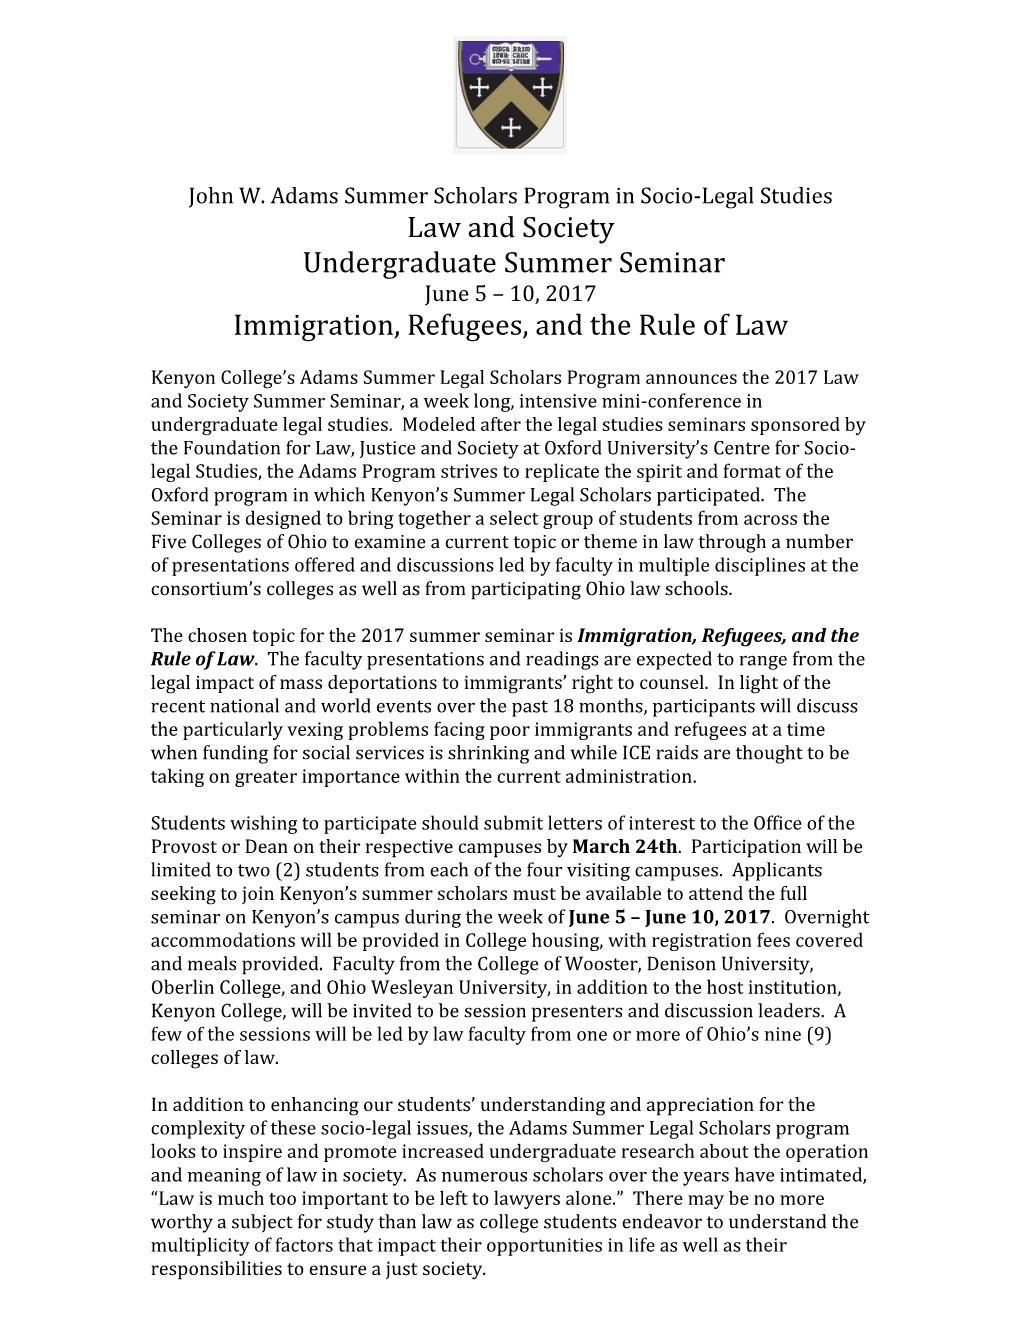 Law and Society Undergraduate Summer Seminar June 5 – 10, 2017 Immigration, Refugees, and the Rule of Law